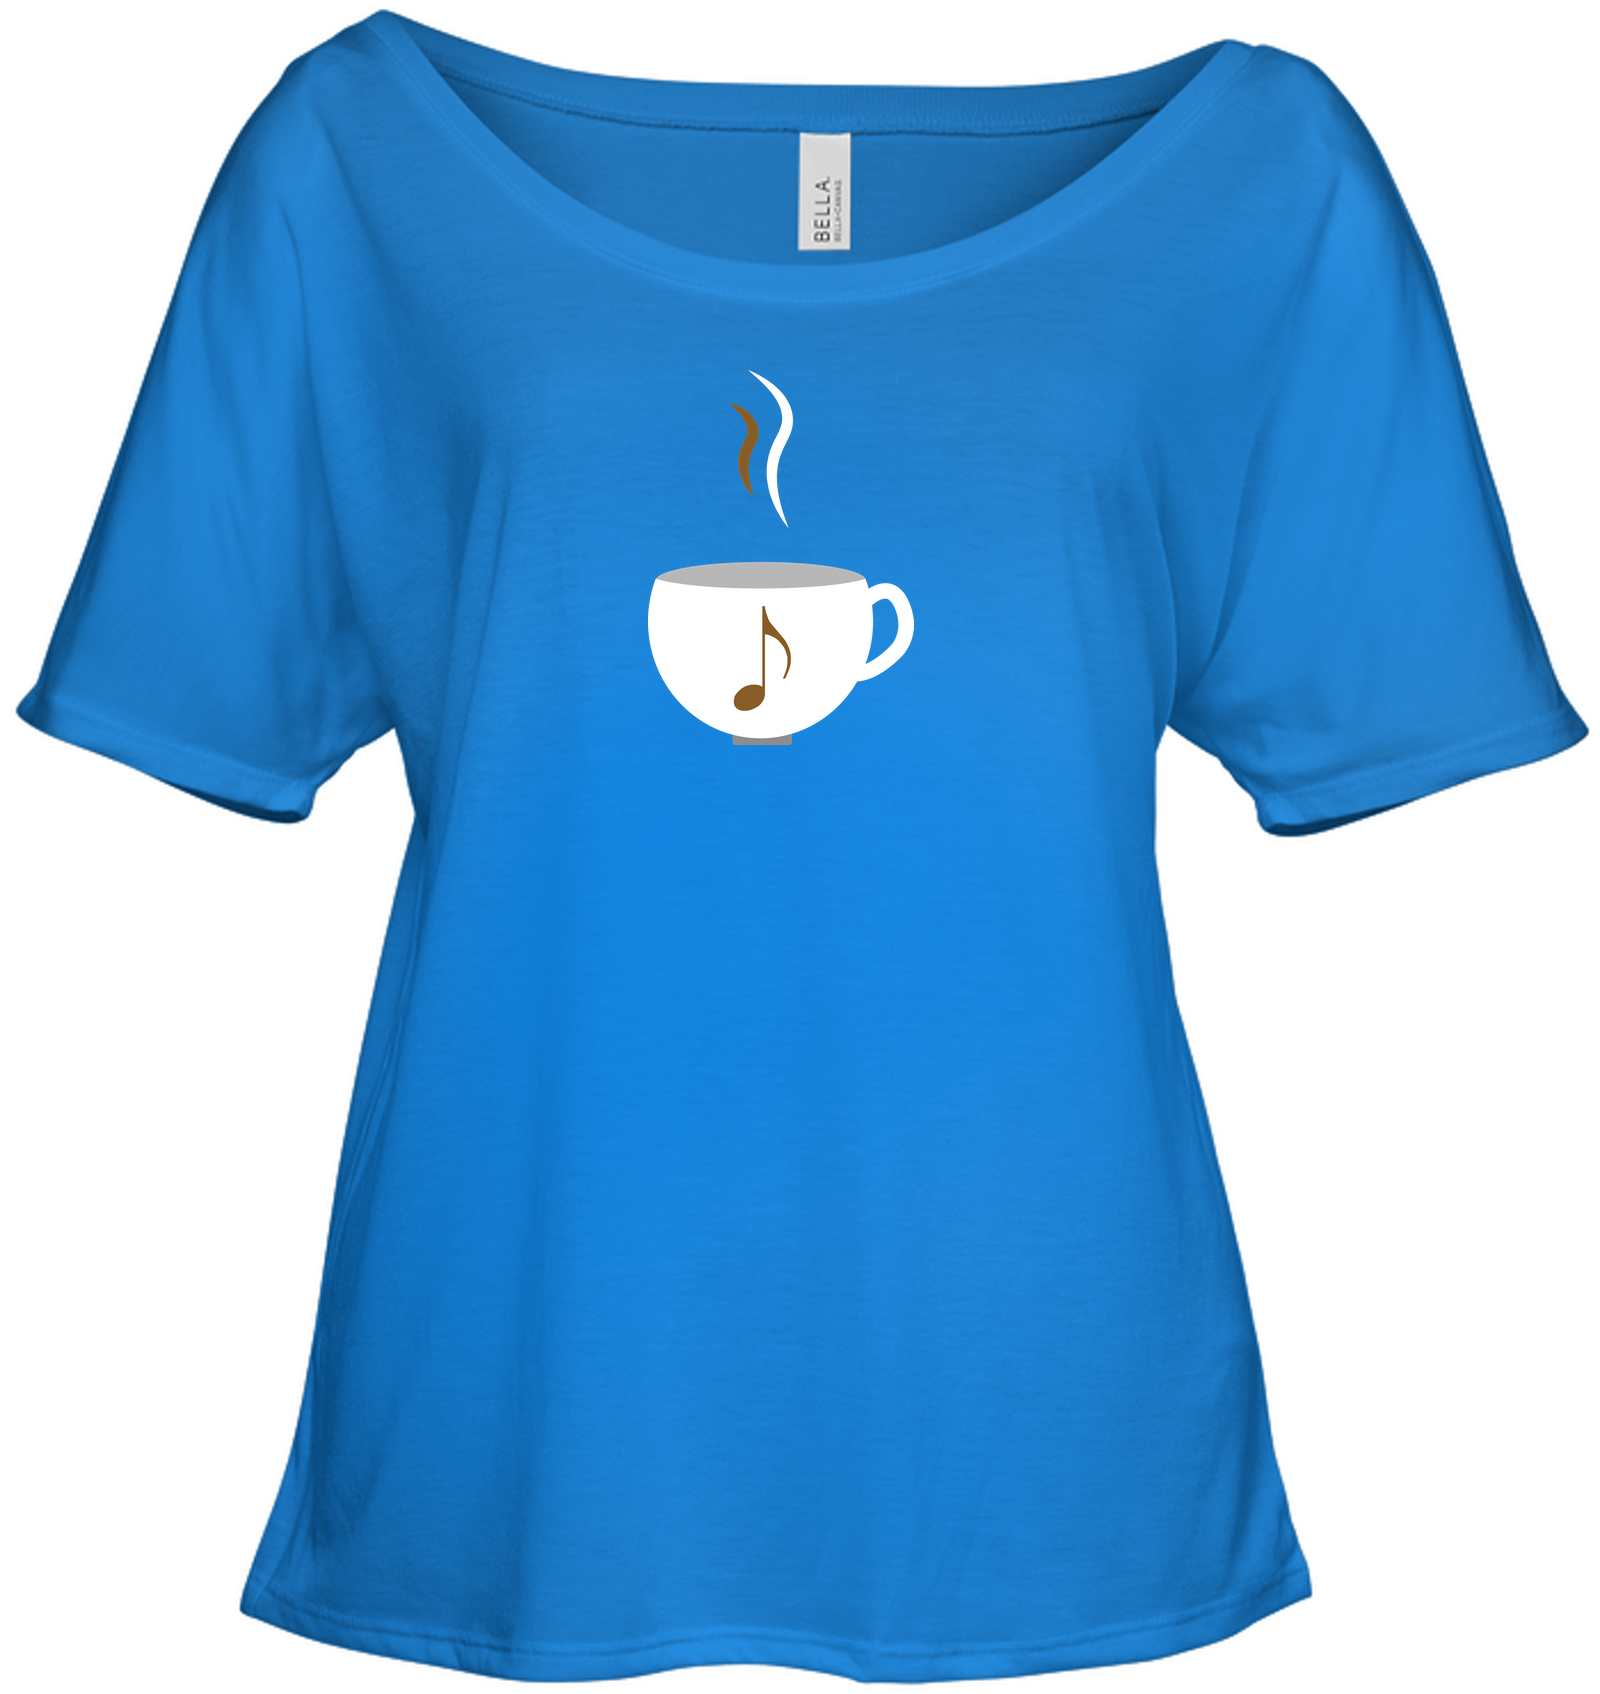 I Love Coffee with a splash of music - Bella + Canvas Women's Slouchy Tee